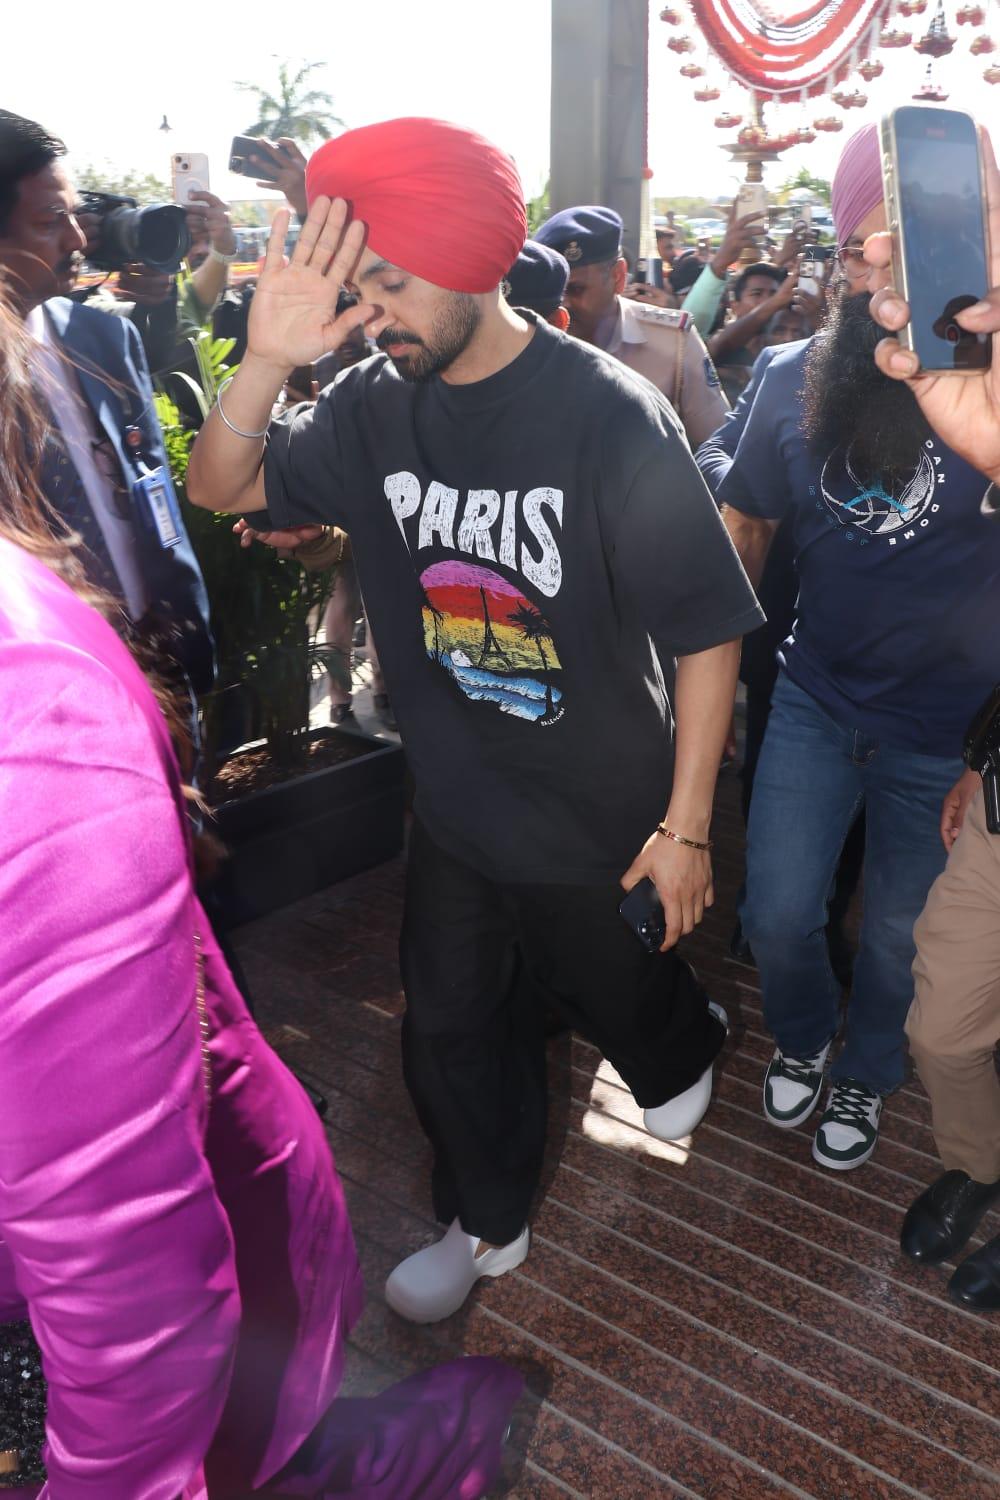 Diljit Dosanjh, who, with his electrifying performance, made everyone dance to the beats of his songs, was clicked at Jamnagar airport as he jetted off